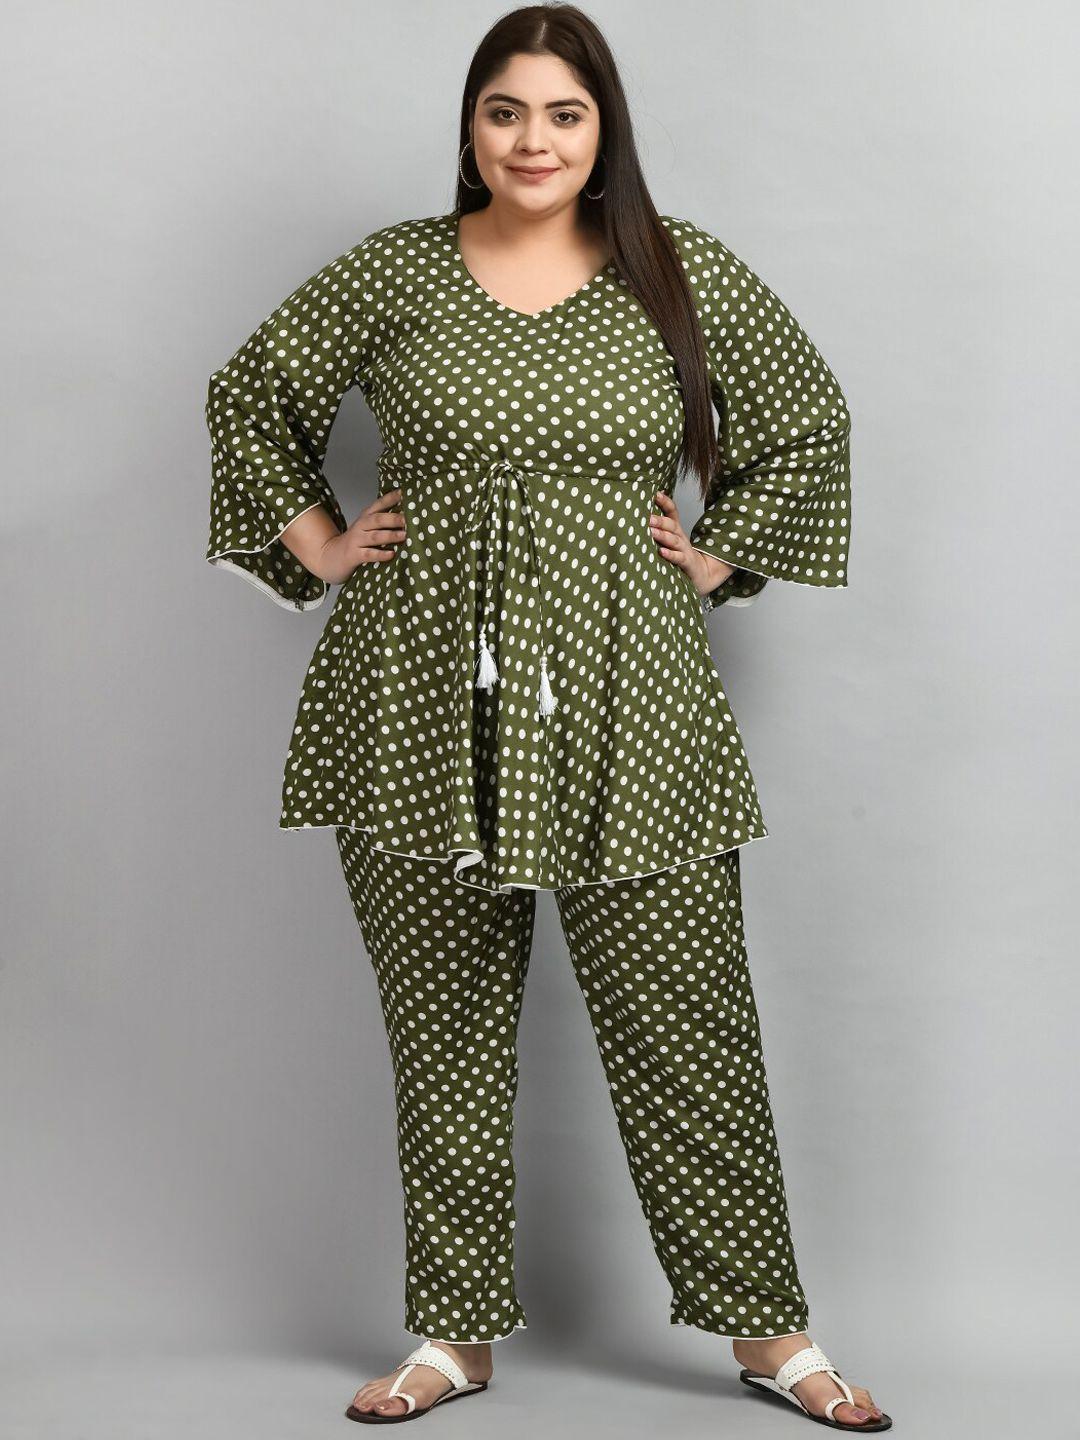 prettyplus by desinoor.com women plus size polka dot printed tunic with trousers